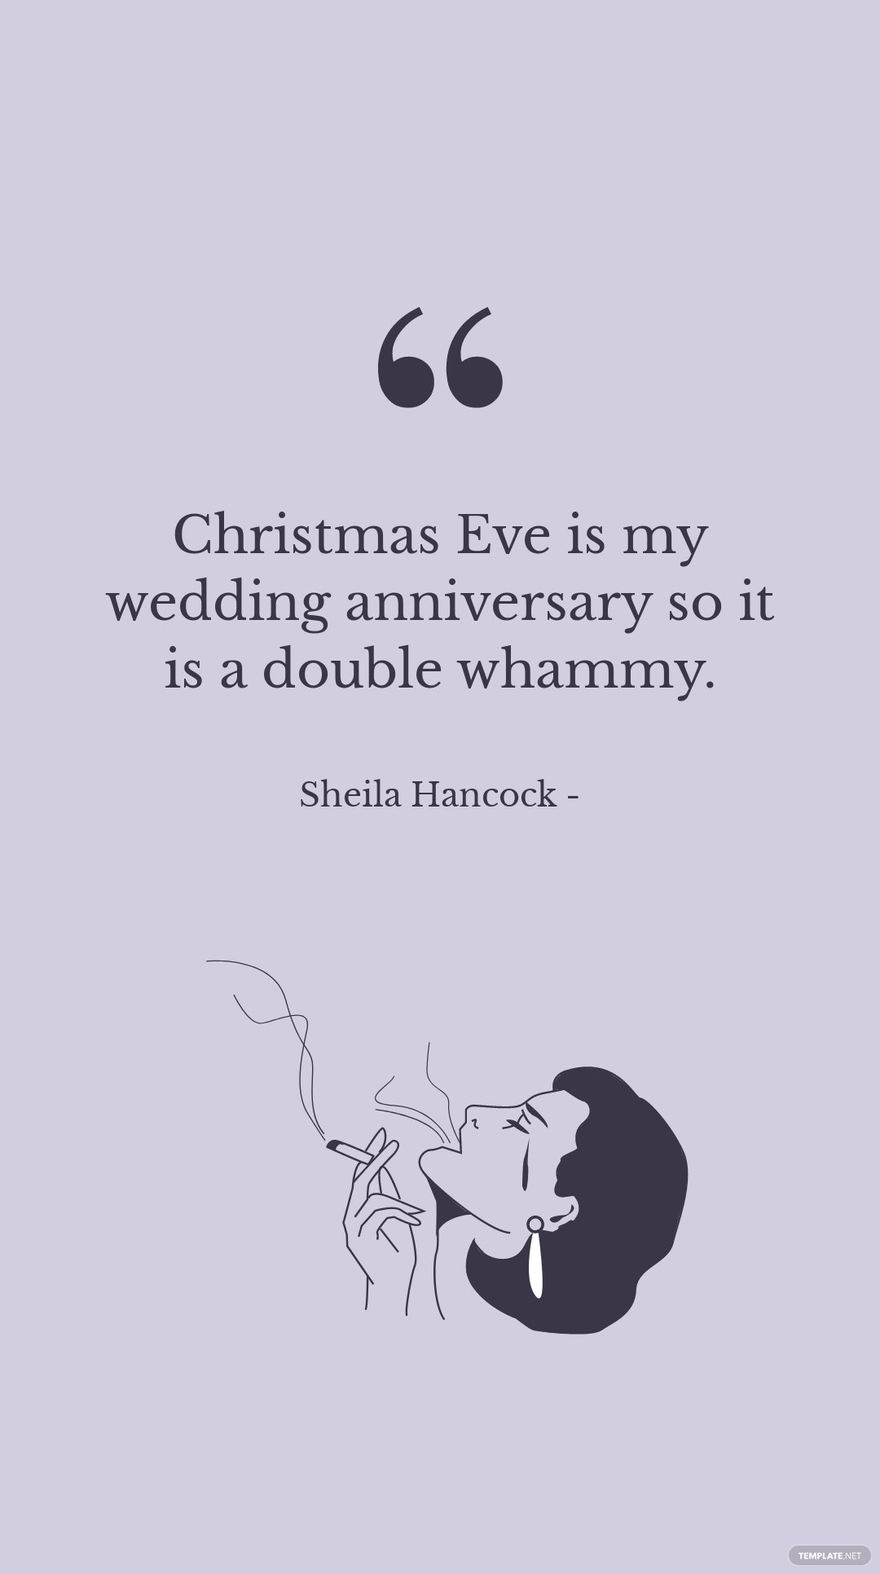 Free Sheila Hancock - Christmas Eve is my wedding anniversary so it is a double whammy.